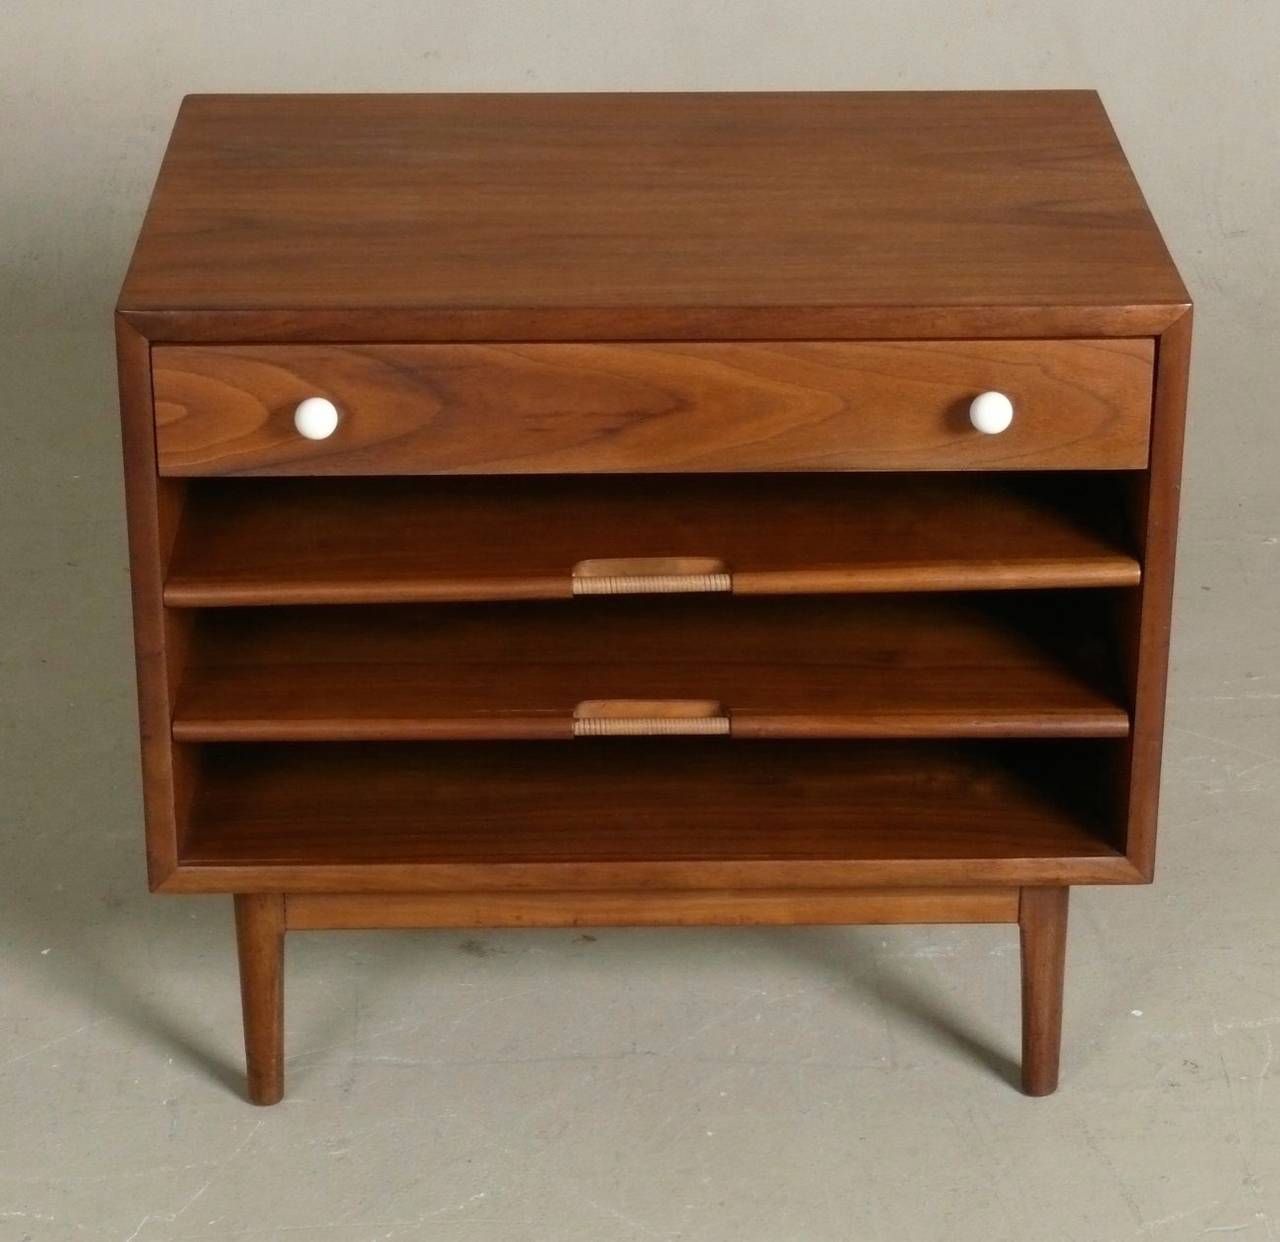 Rare example of Kipp Stewart's walnut magazine table for his Declaration line by Drexel, c. 1962.  Top drawer has original porcelain pulls, below are 2 pull out leaves to keep magazines sorted, each with a integrated, cane wrapped pull.  Would serve